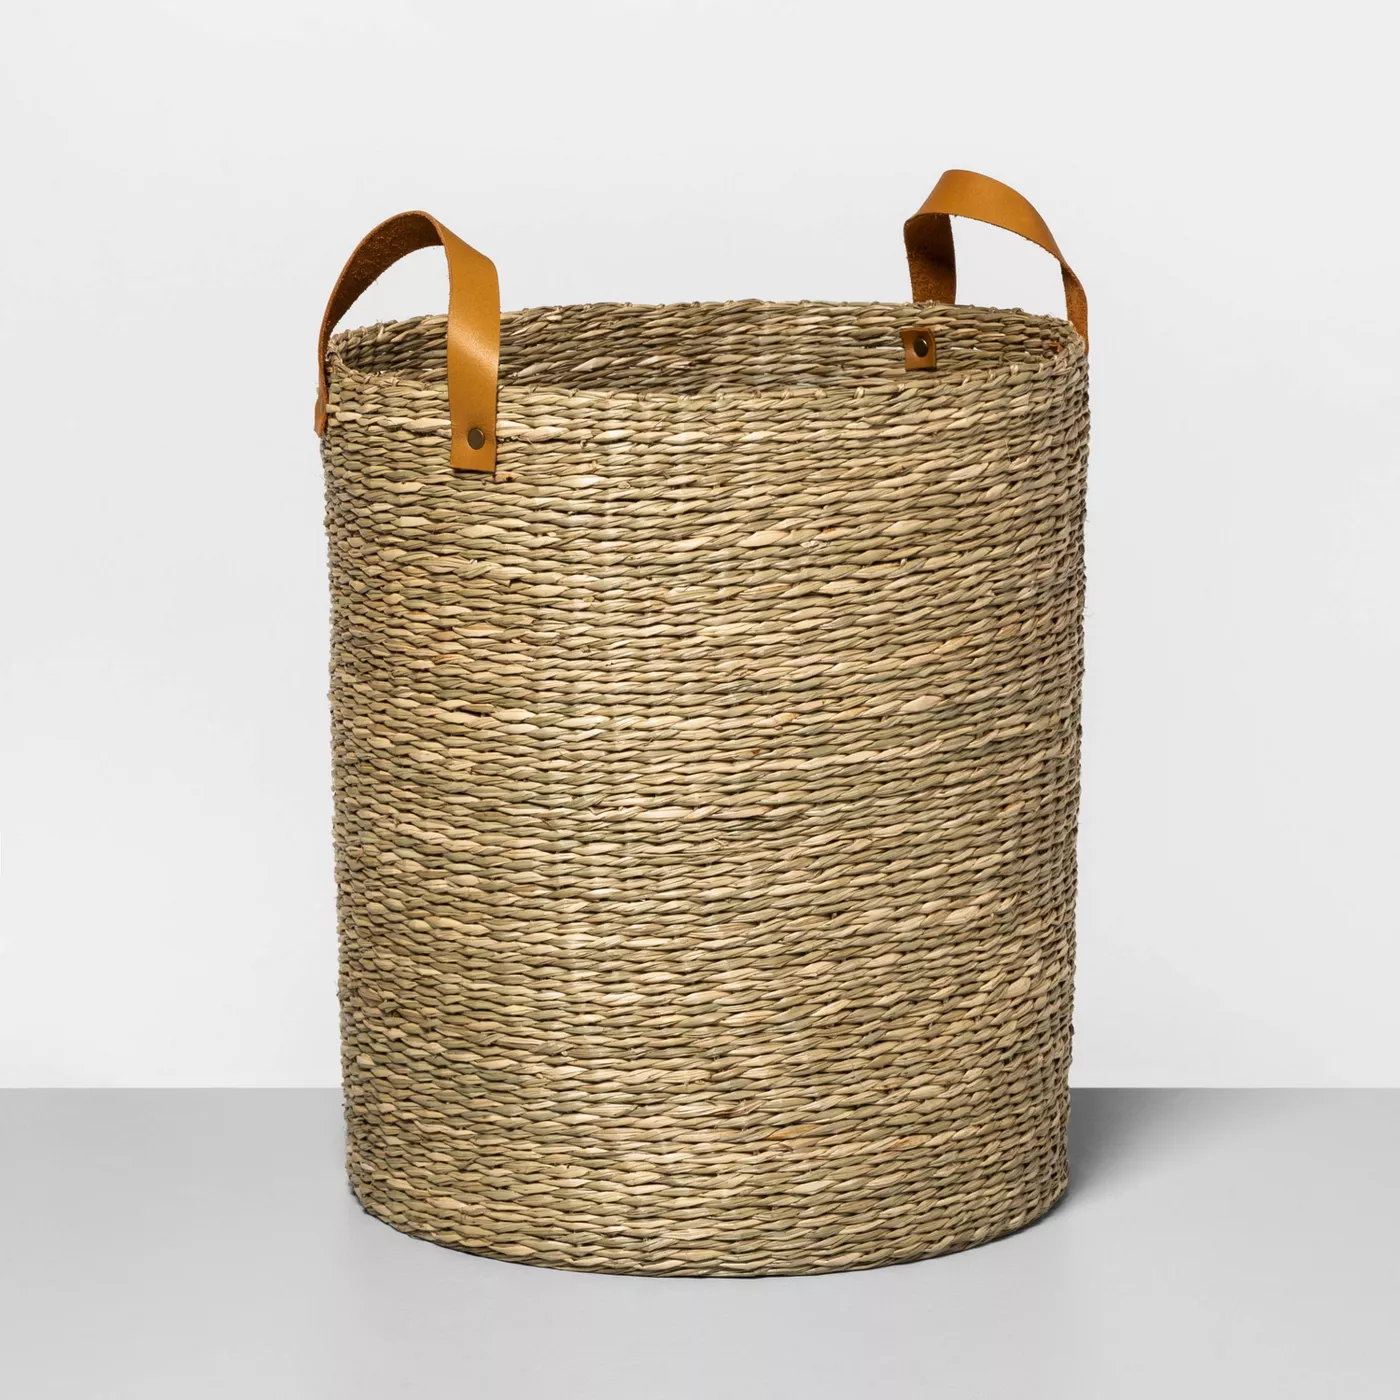 Woven Storage Basket - Hearth & Hand™ with Magnolia - image 1 of 3